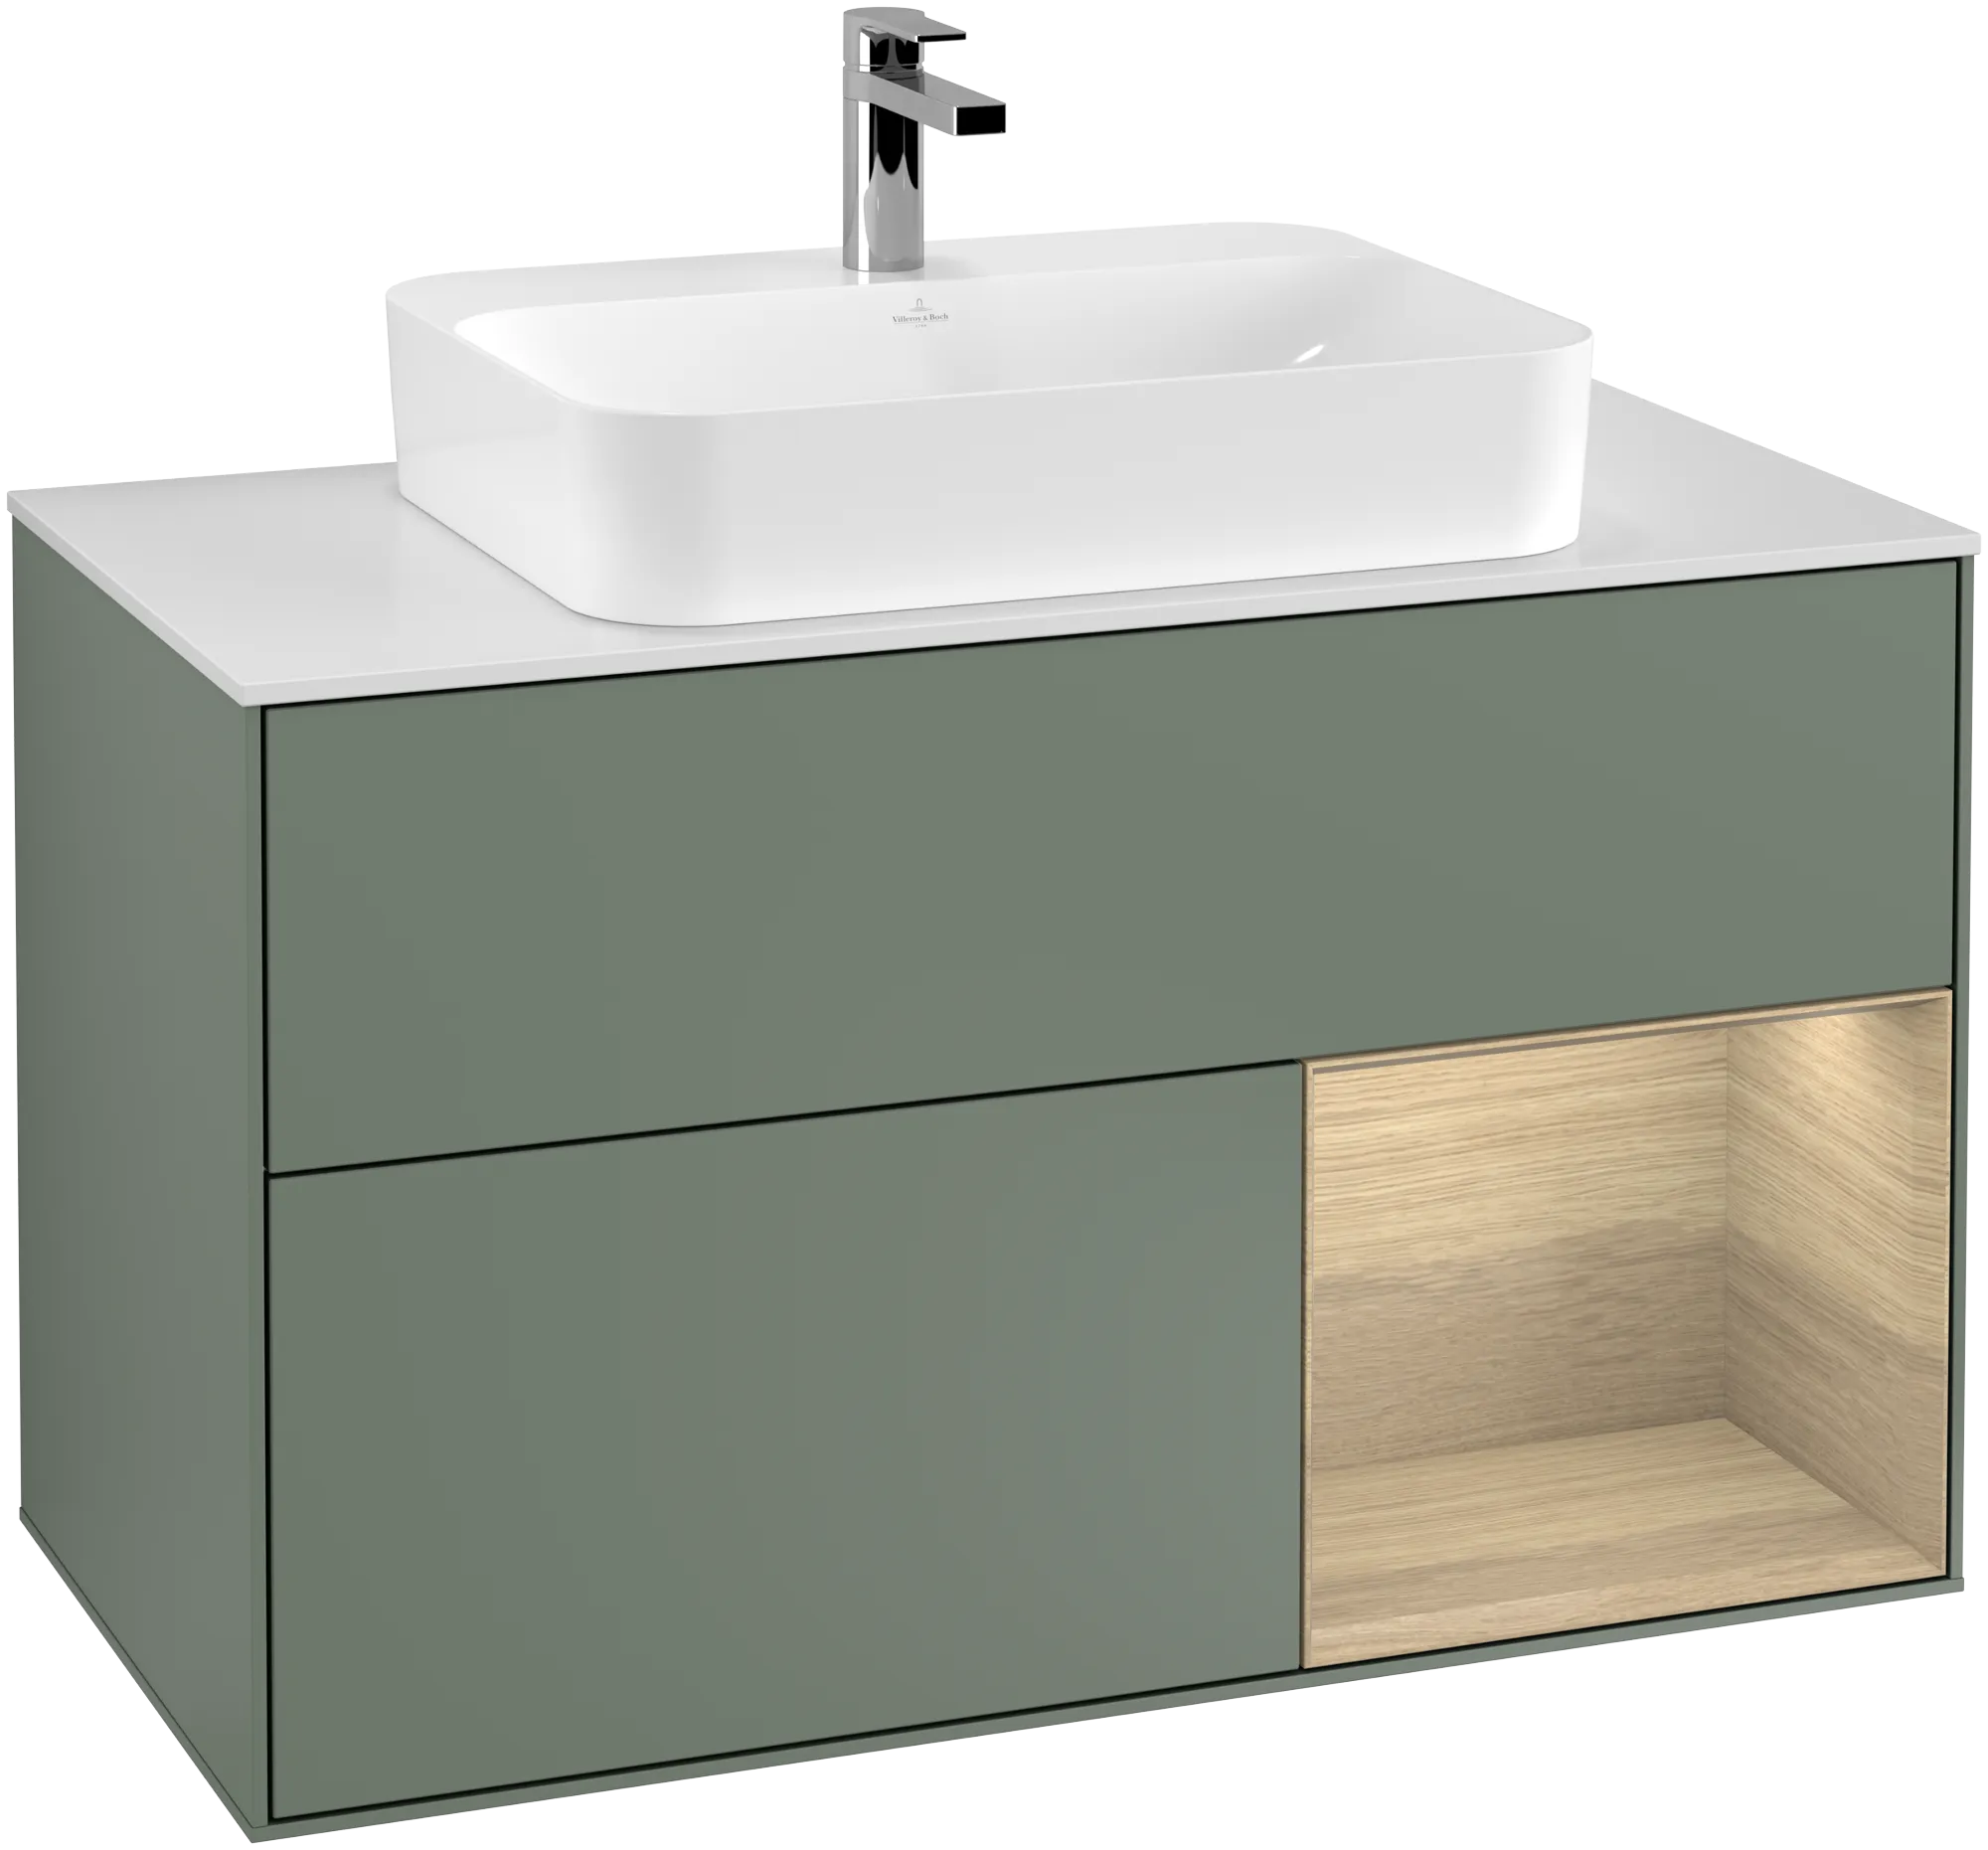 Picture of VILLEROY BOCH Finion Vanity unit, with lighting, 2 pull-out compartments, 1000 x 603 x 501 mm, Olive Matt Lacquer / Oak Veneer / Glass White Matt #G371PCGM